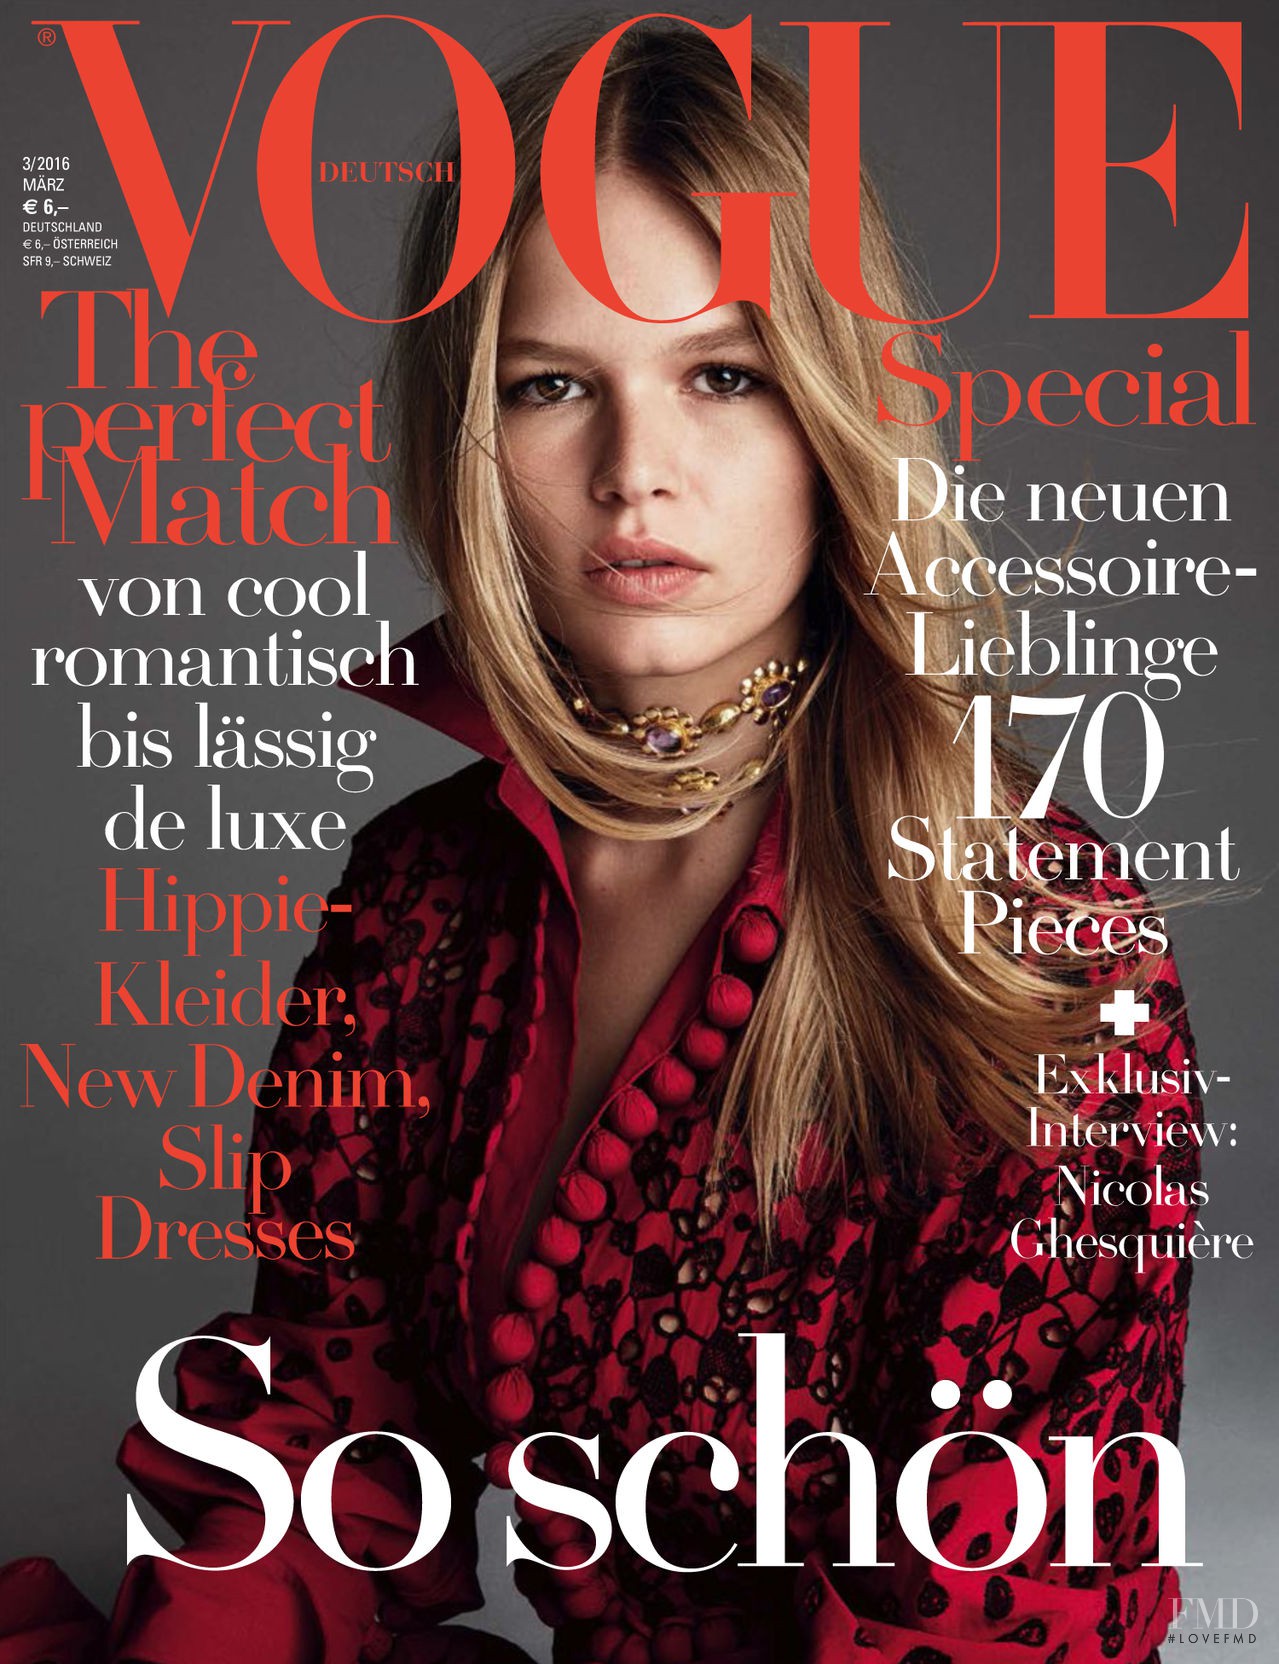 Cover of Vogue Germany with Anna Ewers, March 2016 (ID:36704 ...